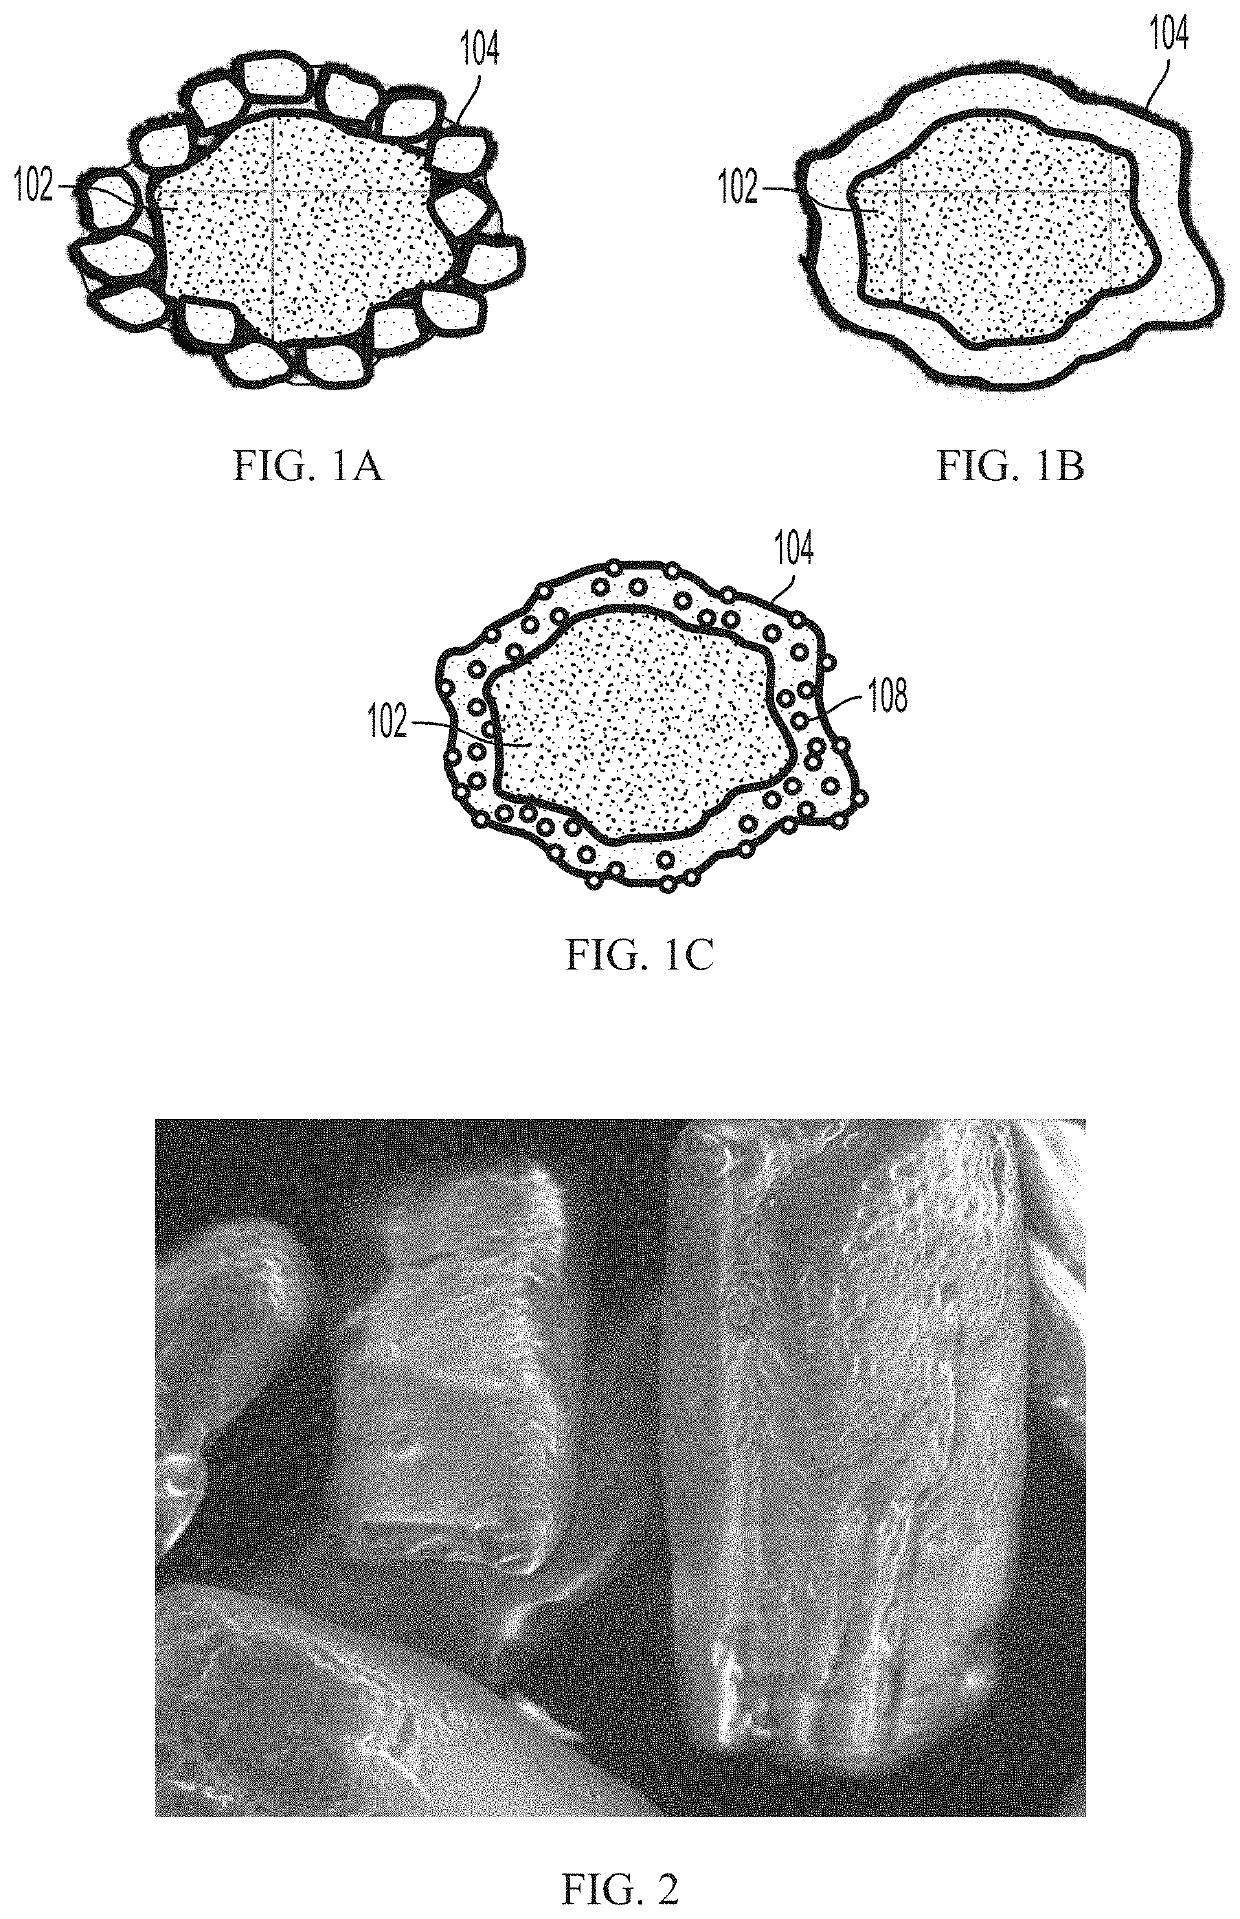 Minimizing agglomeration, aeration, and preserving the coating of pharmaceutical compositions comprising ibuprofen